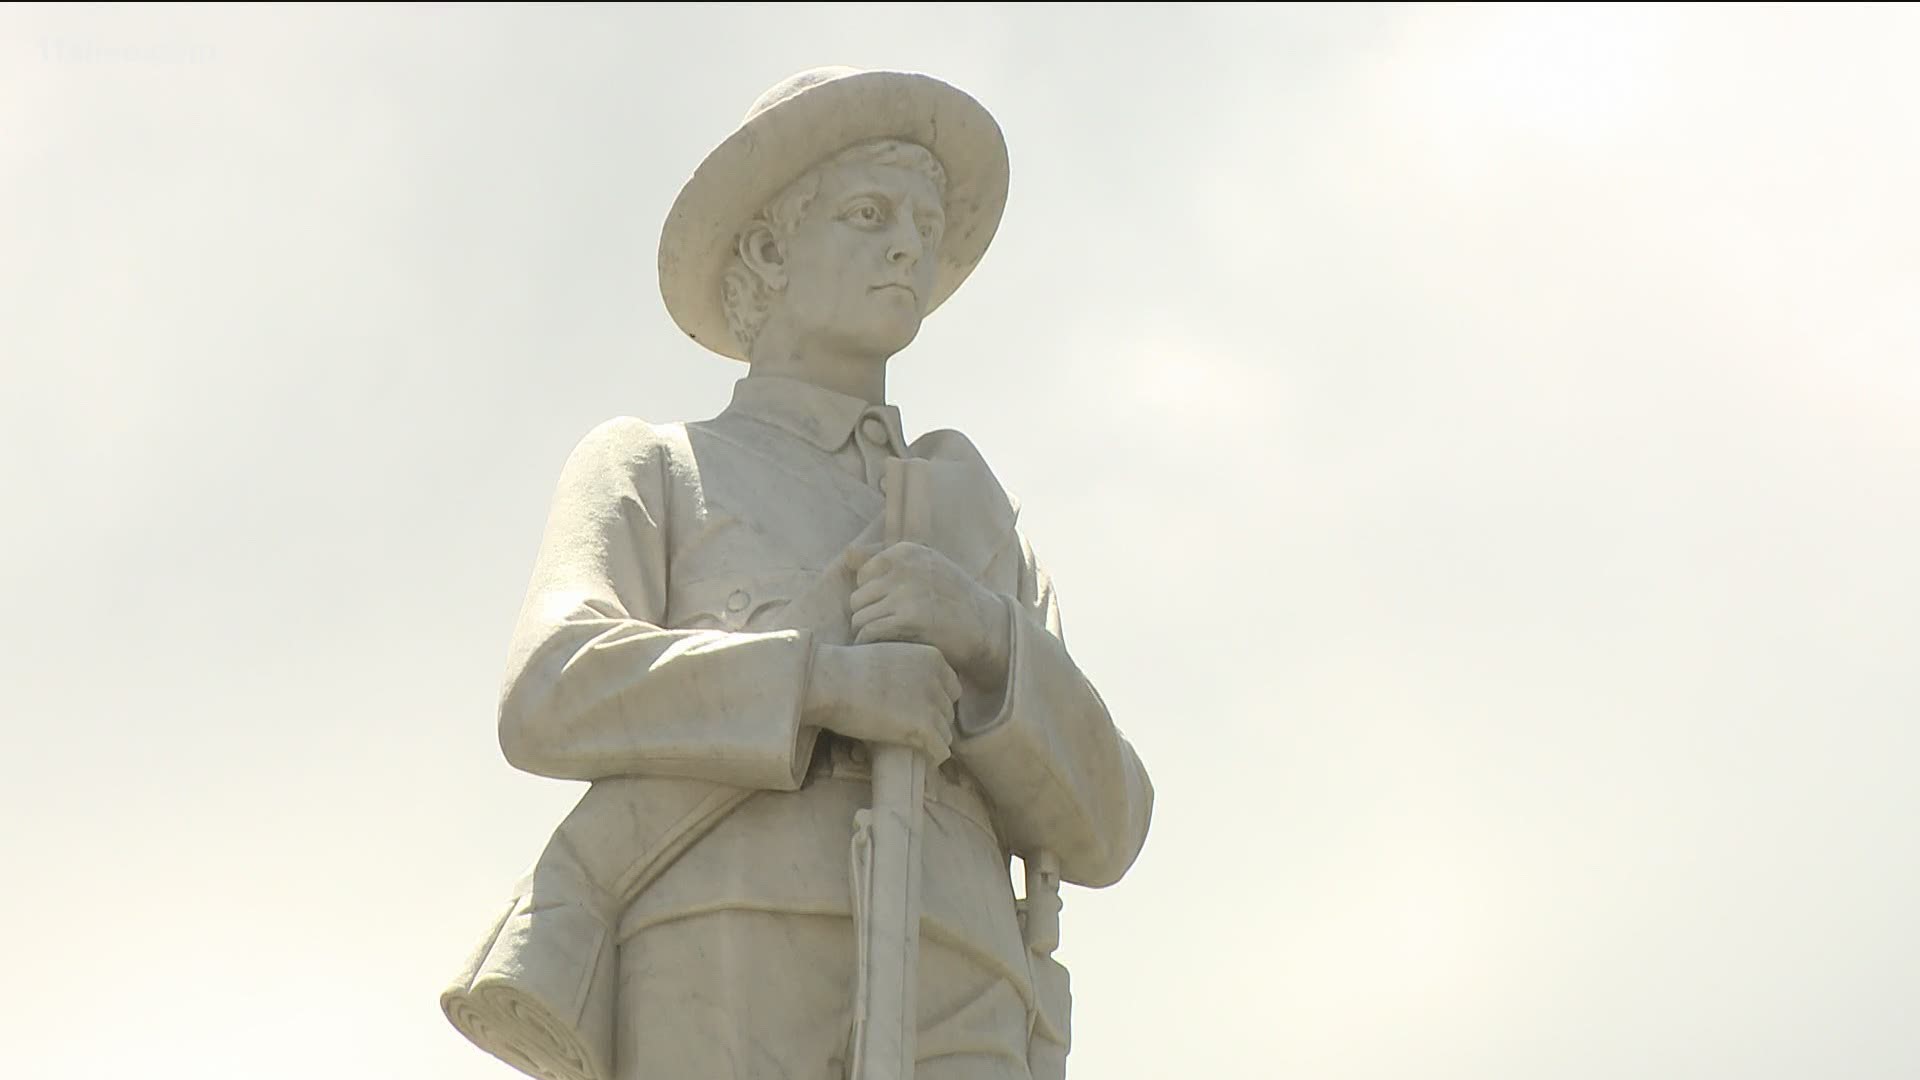 Activists gathered in front of the Douglas County Courthouse to call for the removal of a Confederate Statute and were immediately met with opposition.